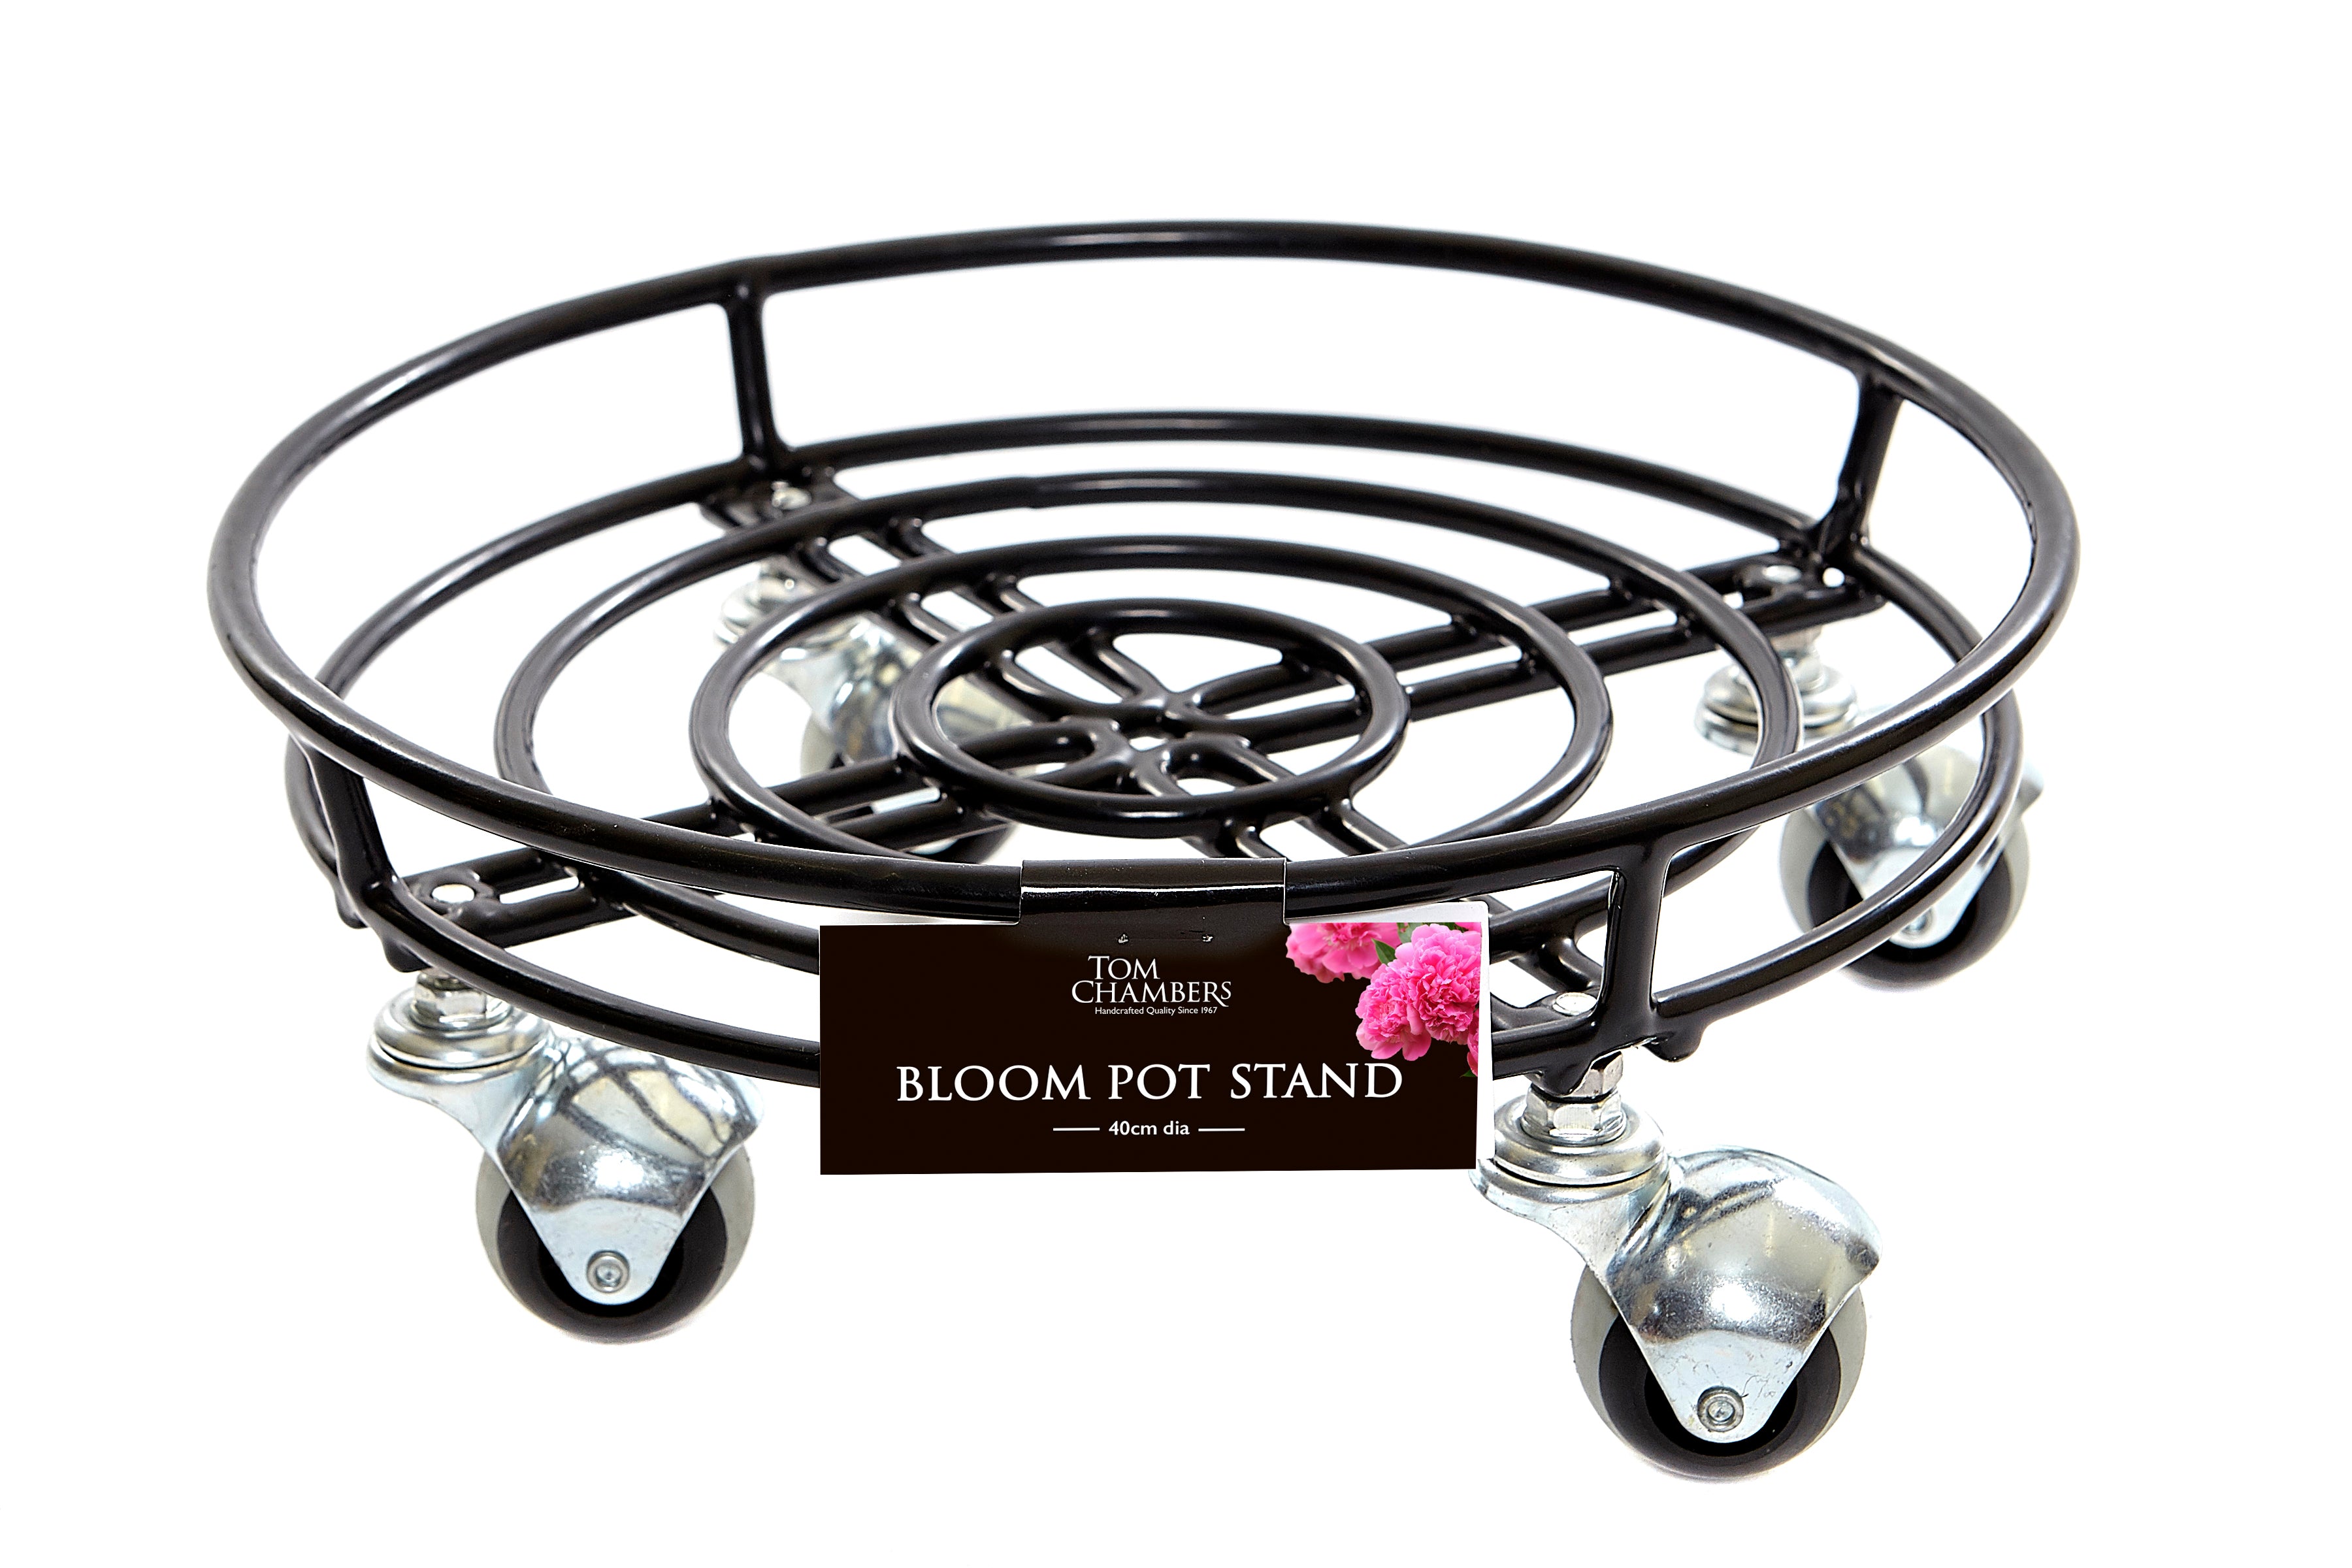 Pack of 2 Tom Chambers Handcrafted Heavy Duty Round Black Metal Garden Patio Plant Flower Pot Stand Caddy Trolley Dolly on Strong Metal Castor Wheels 37cm